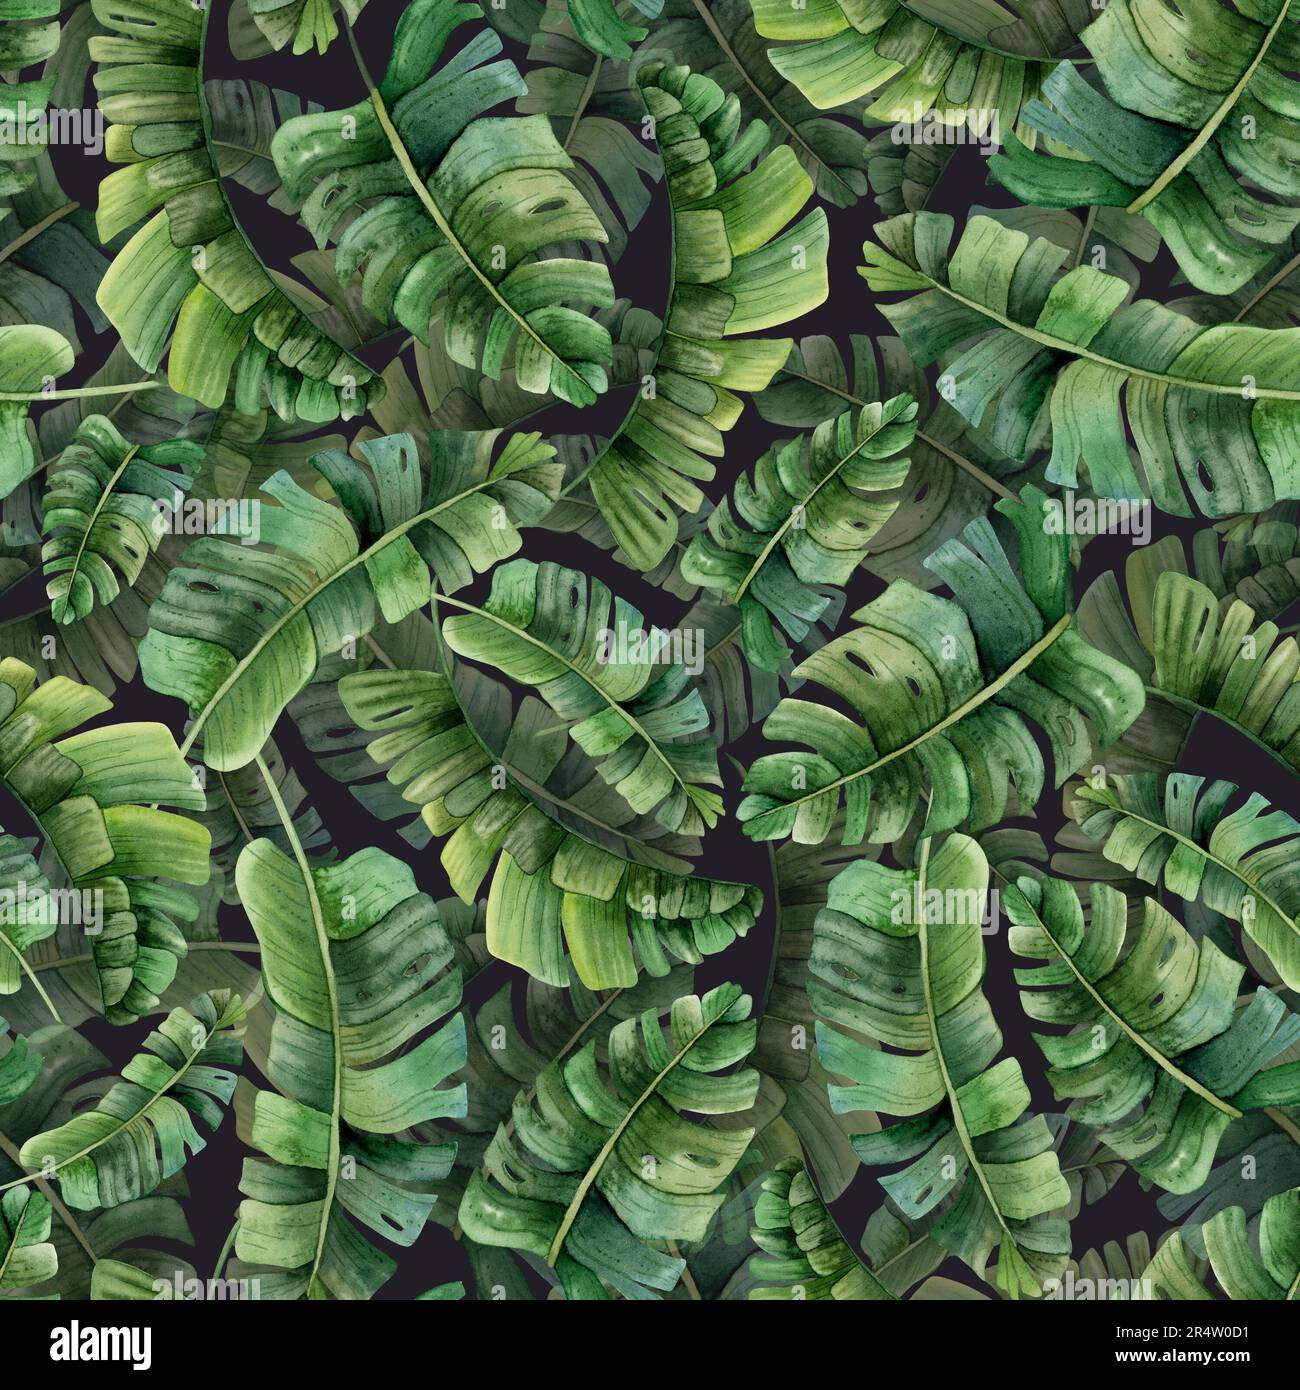 Jungle tropical palm leaves watercolor seamless pattern on dark grey background with green jungle plants Stock Photo